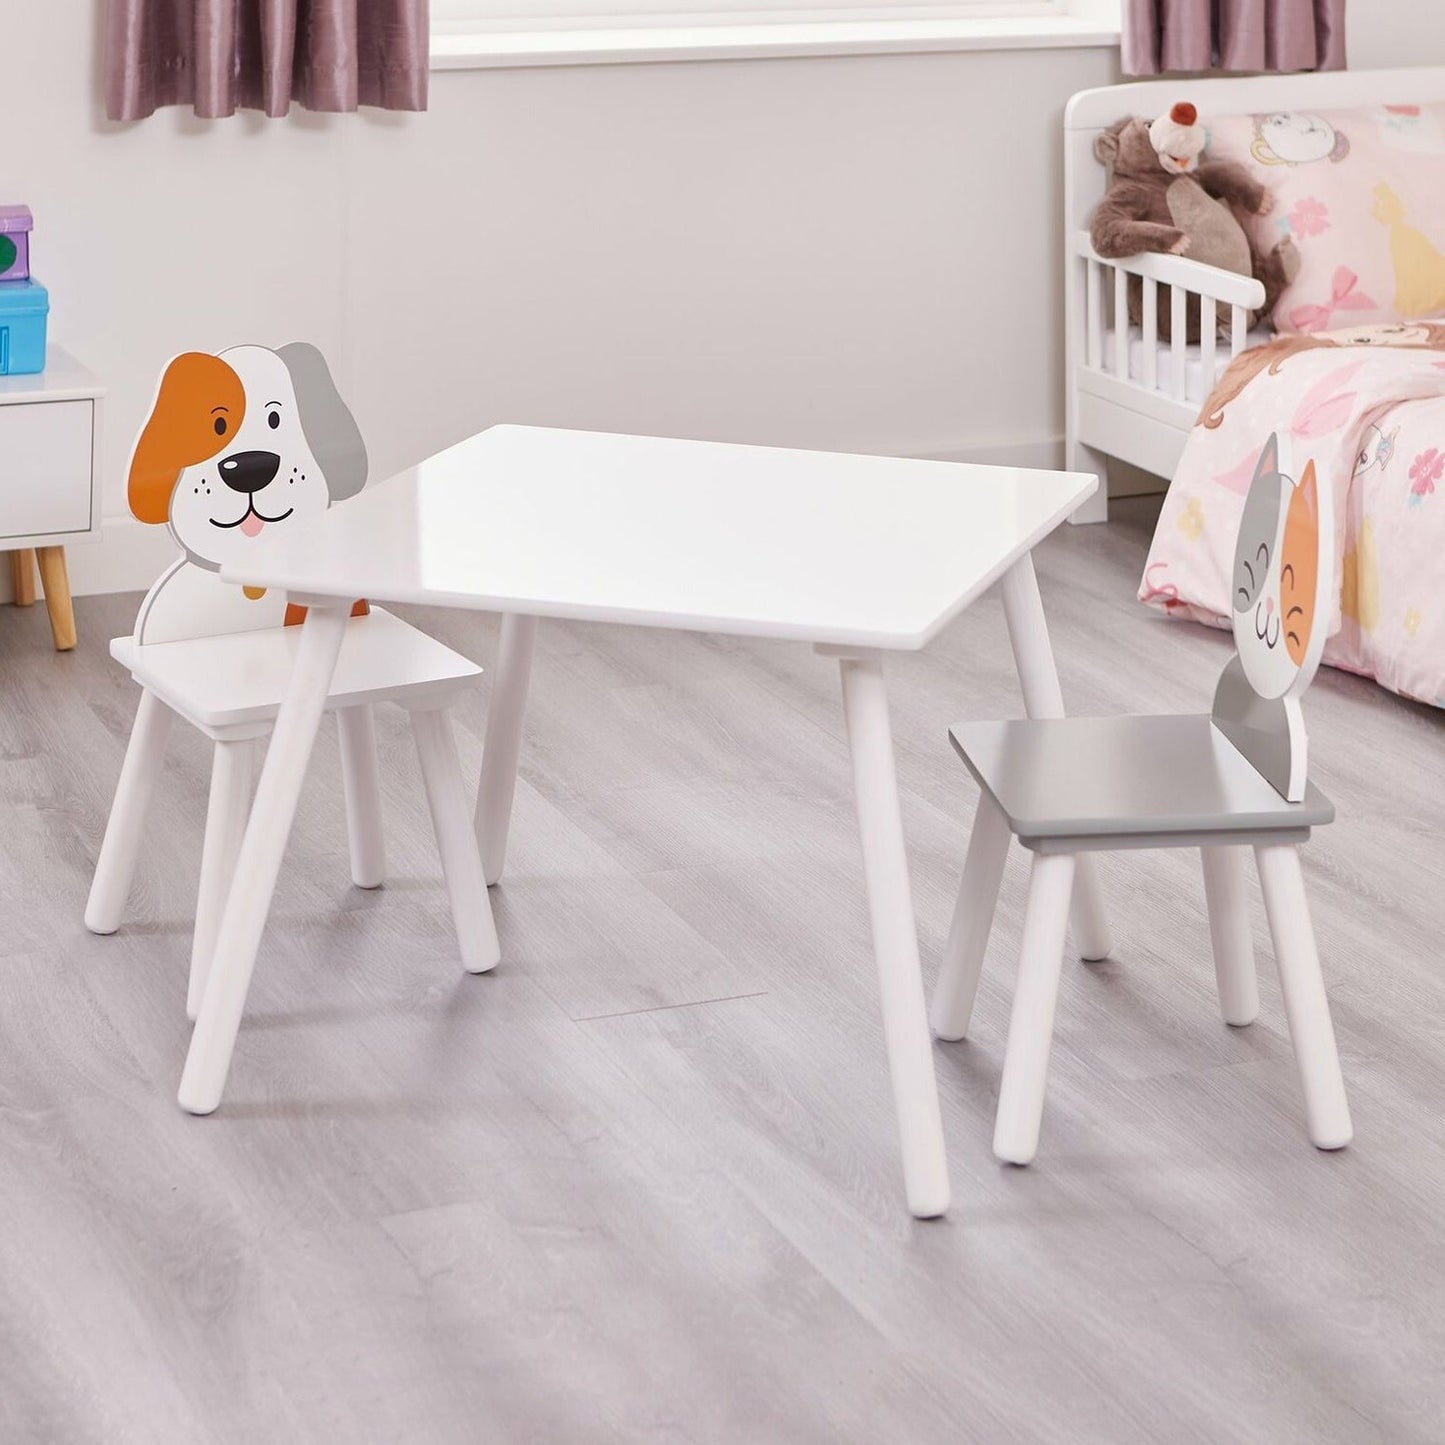 Cat and Dog Table and Chairs by Liberty House Toys